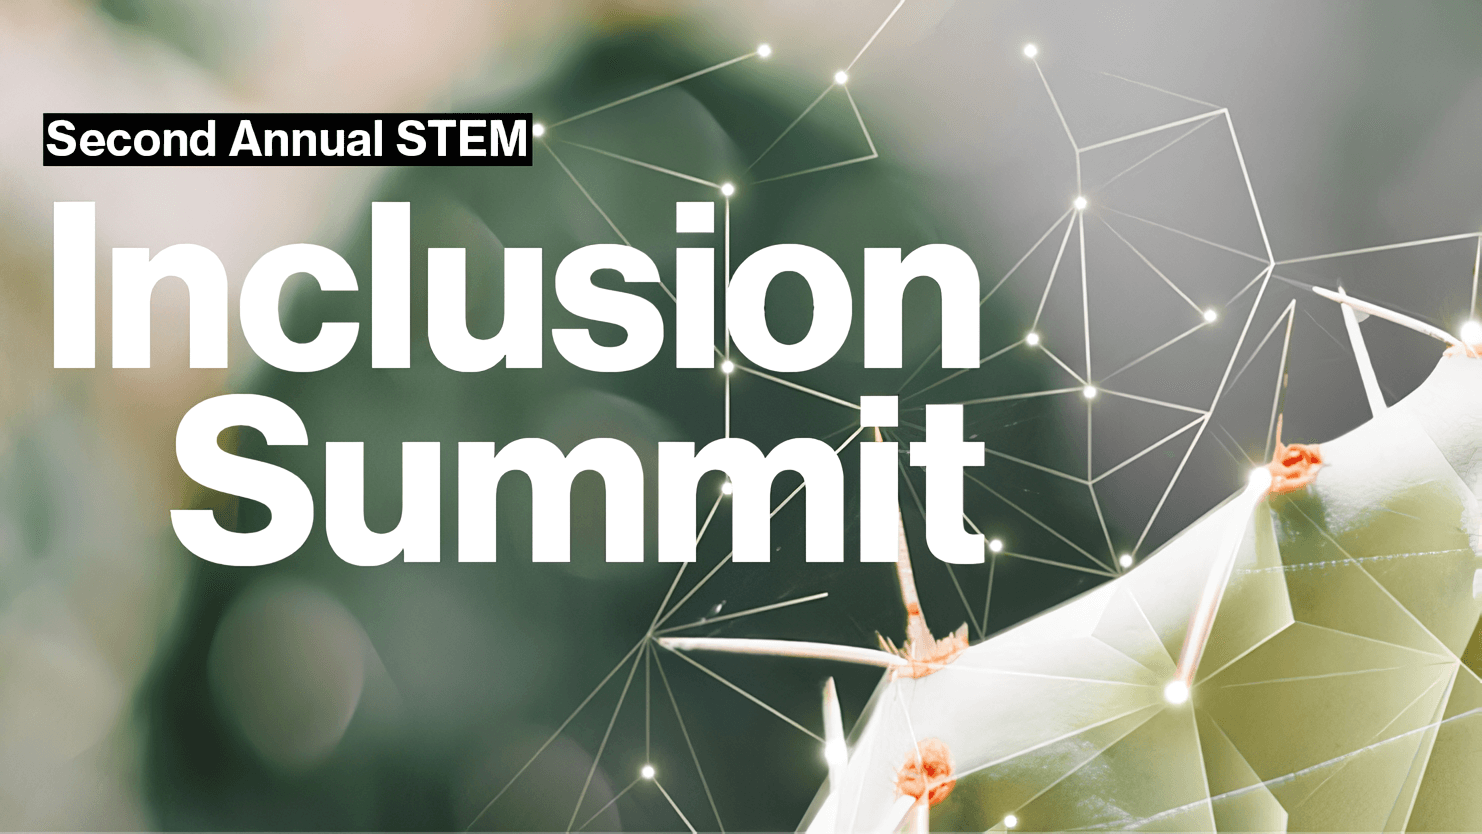 Graphic of "Second Annual STEM Inclusion Summit" on a cactus background